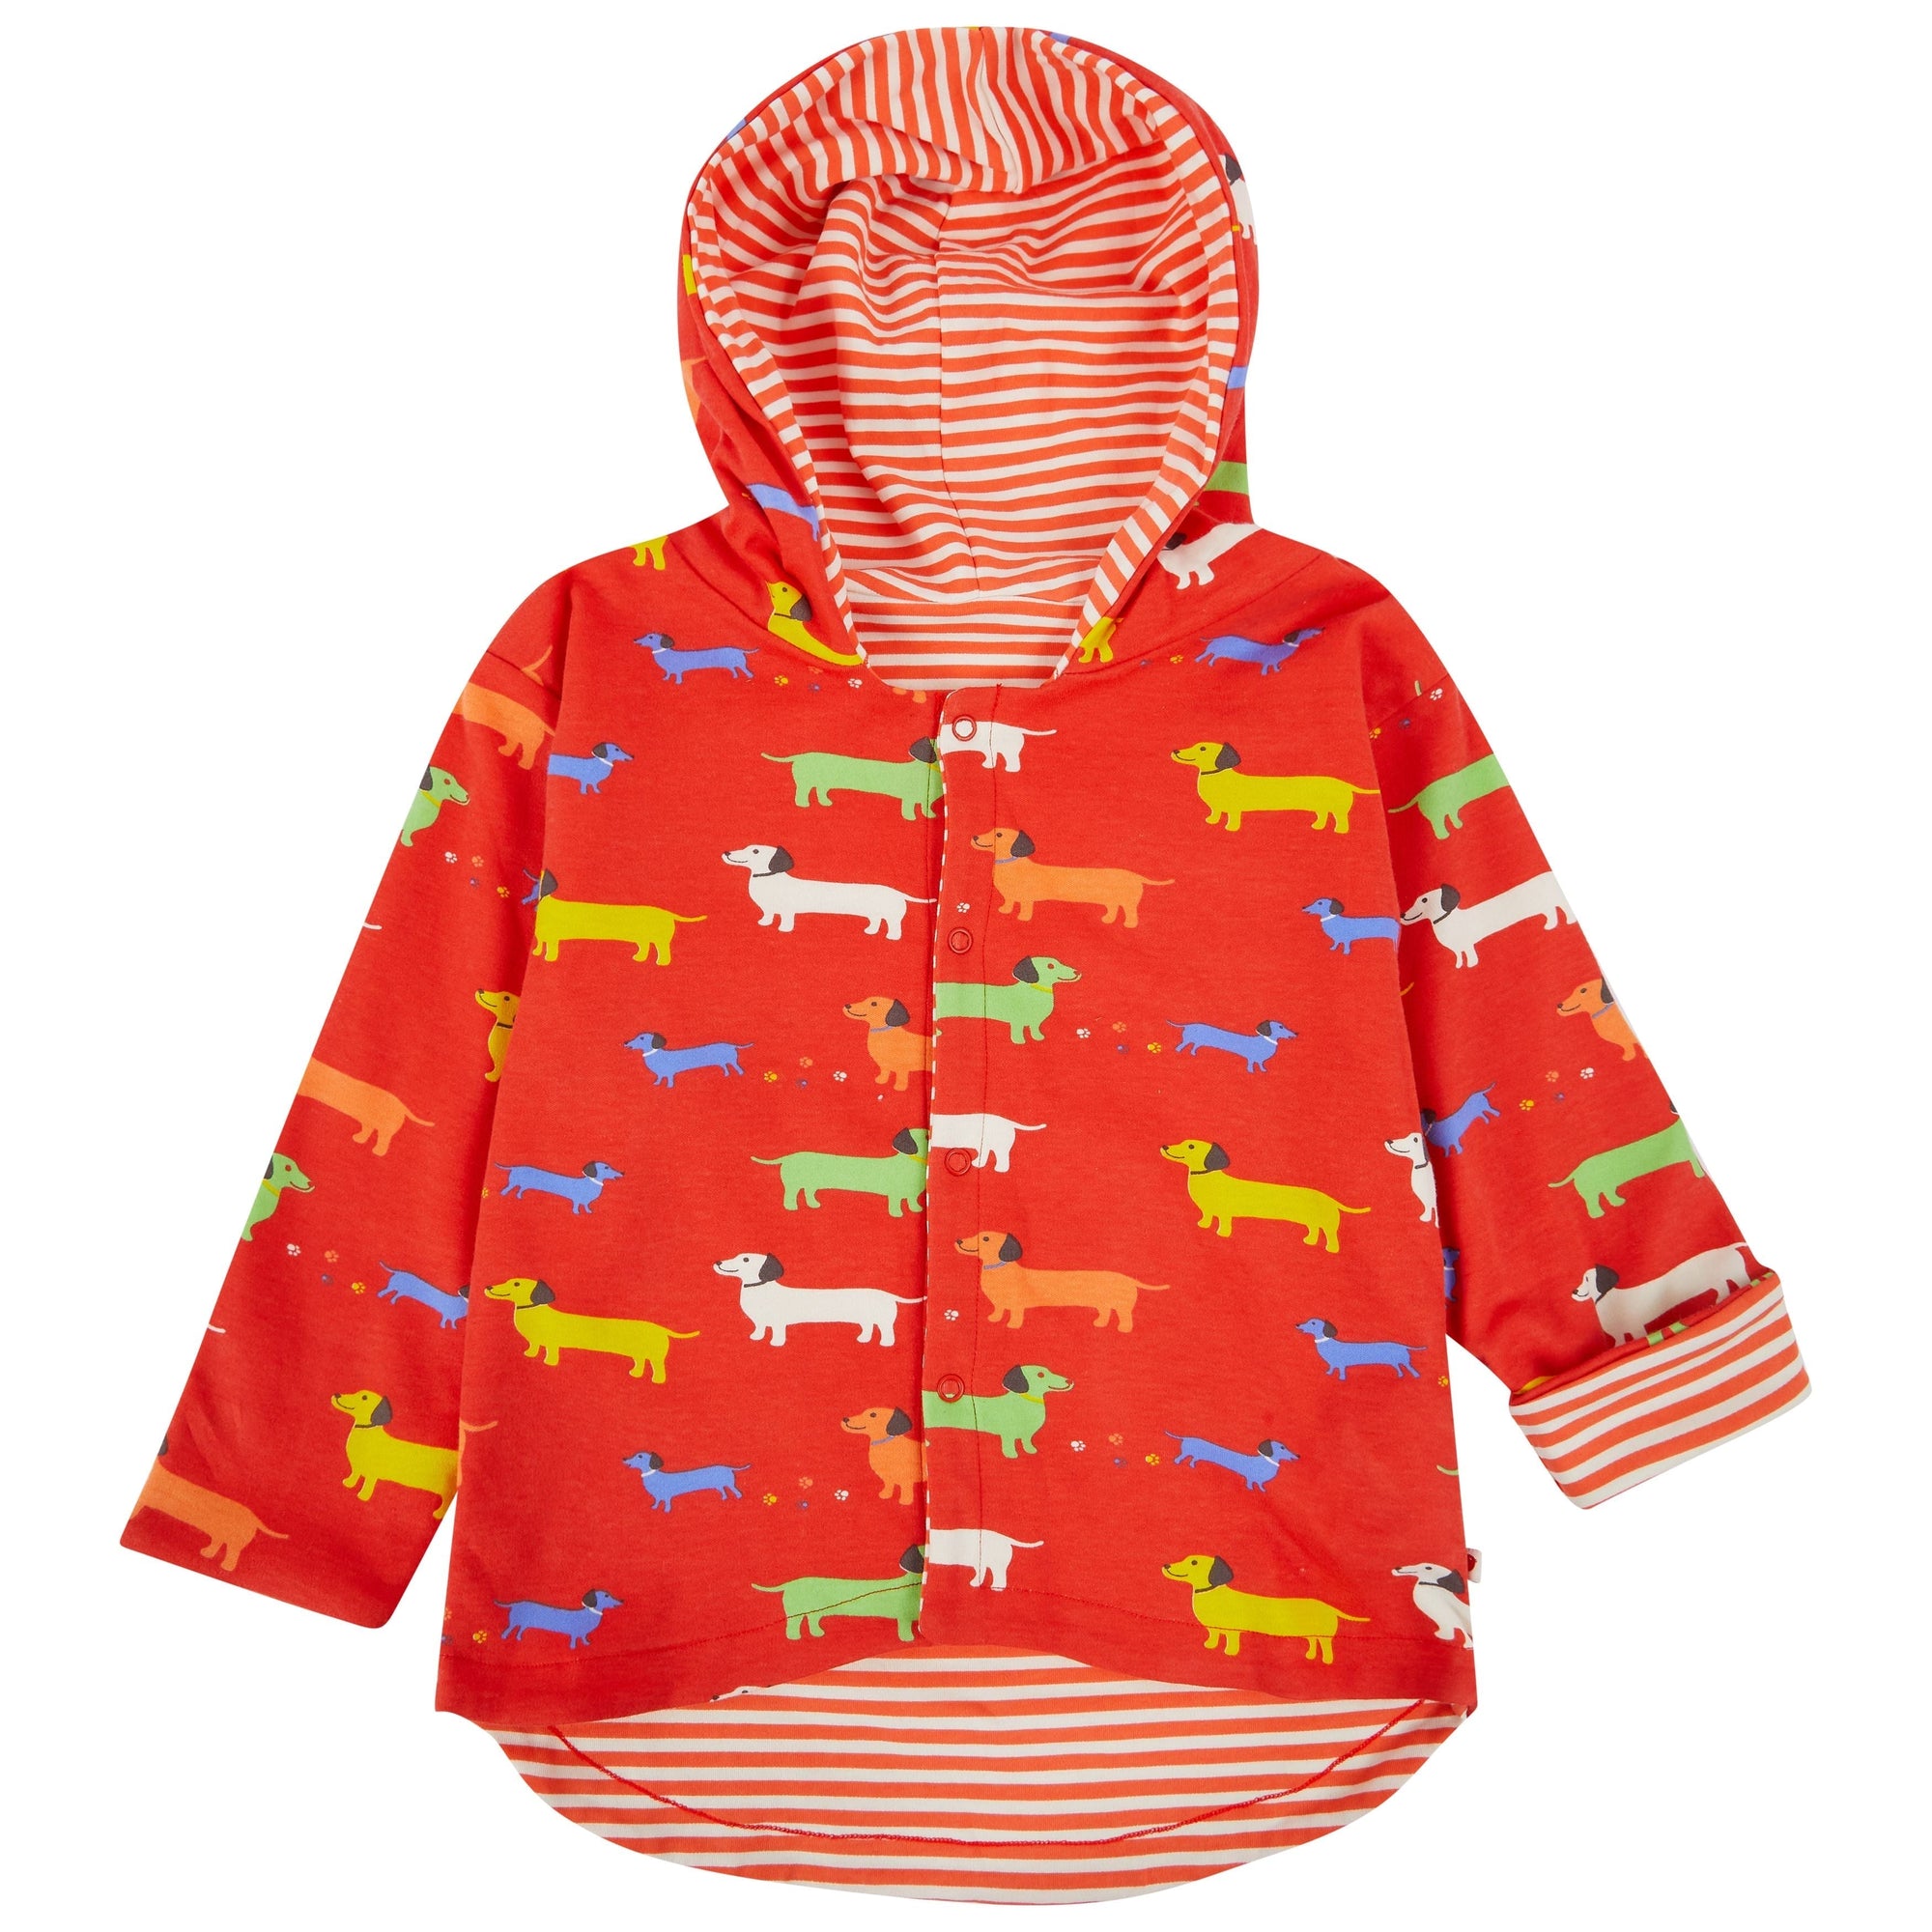 Sausage Dog Reversible Jacket - 1 Left Size 5-6 years-Piccalilly-Modern Rascals